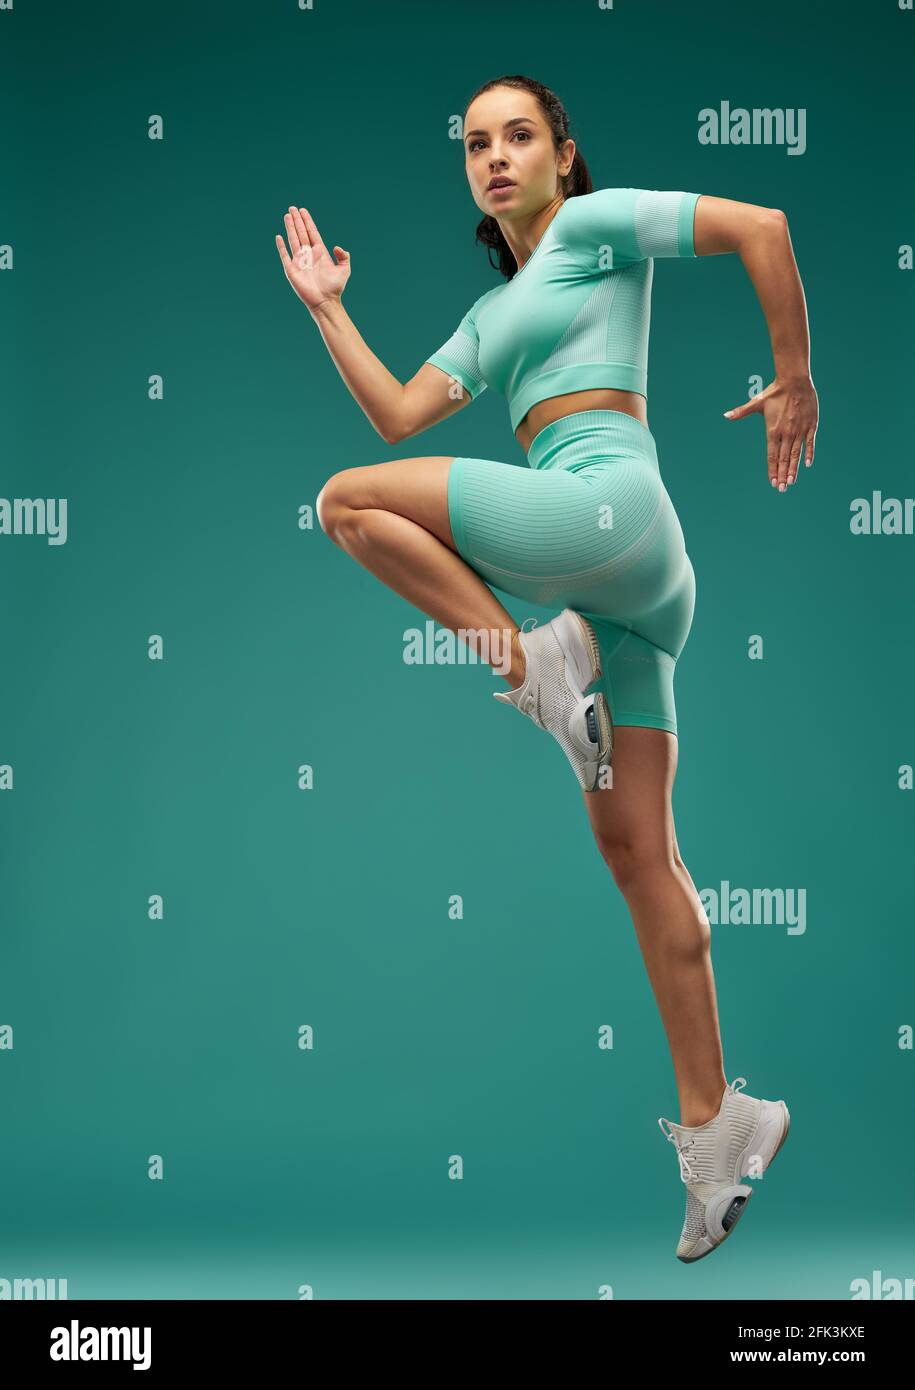 Sporty young woman jumping in the air Stock Photo